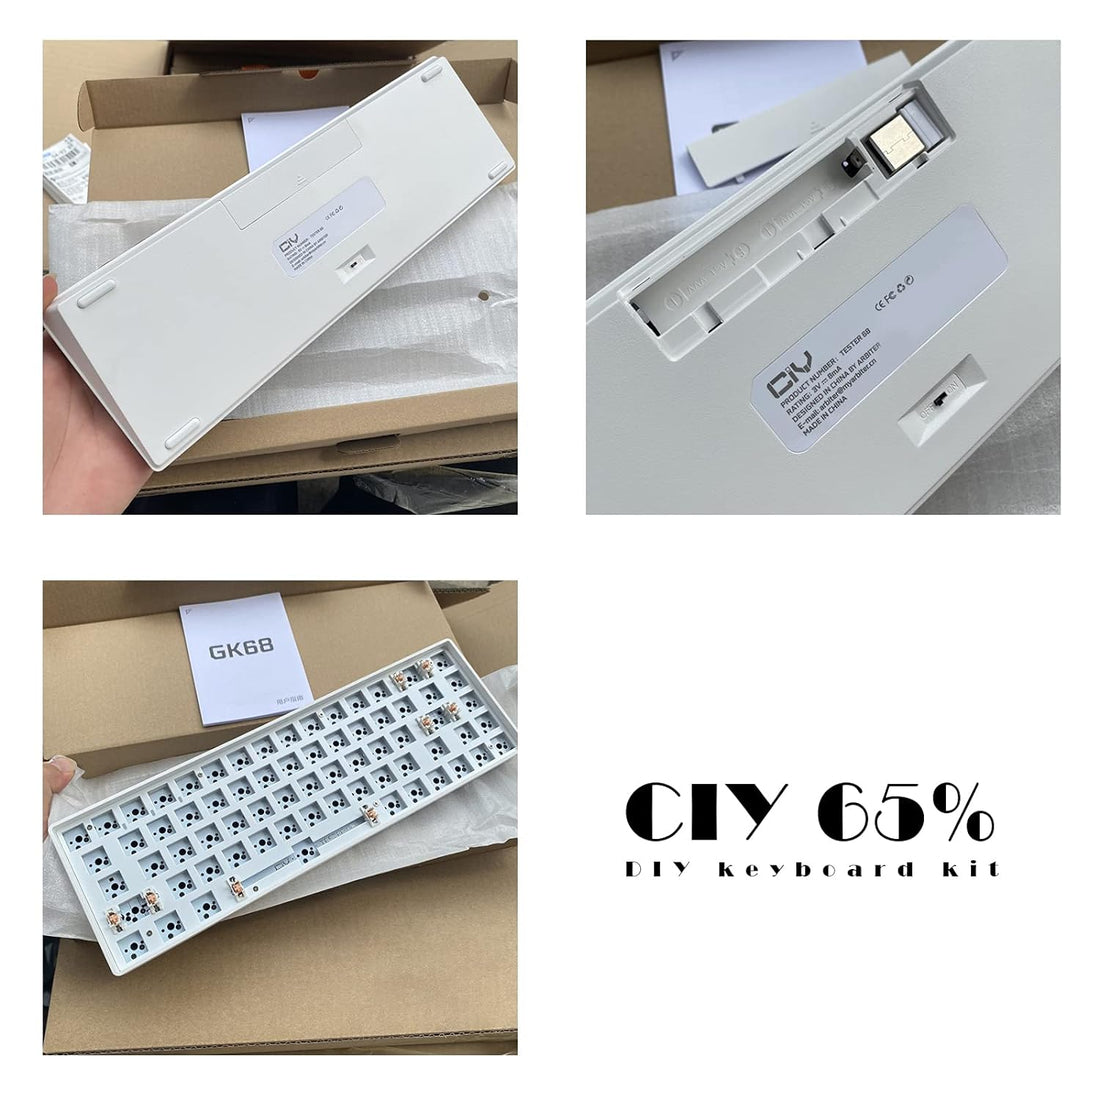 CIY GK68 Dual Mode Wireless Hotswap Keyboard Kit, DIY 65% Keyboard, Bluetooth 5.0/2.4G Wireless, Replaceable MX Switch 5Pin/3Pin, ABS Shell,Metal Positioning Plate, Sound Insulation Mat(White)